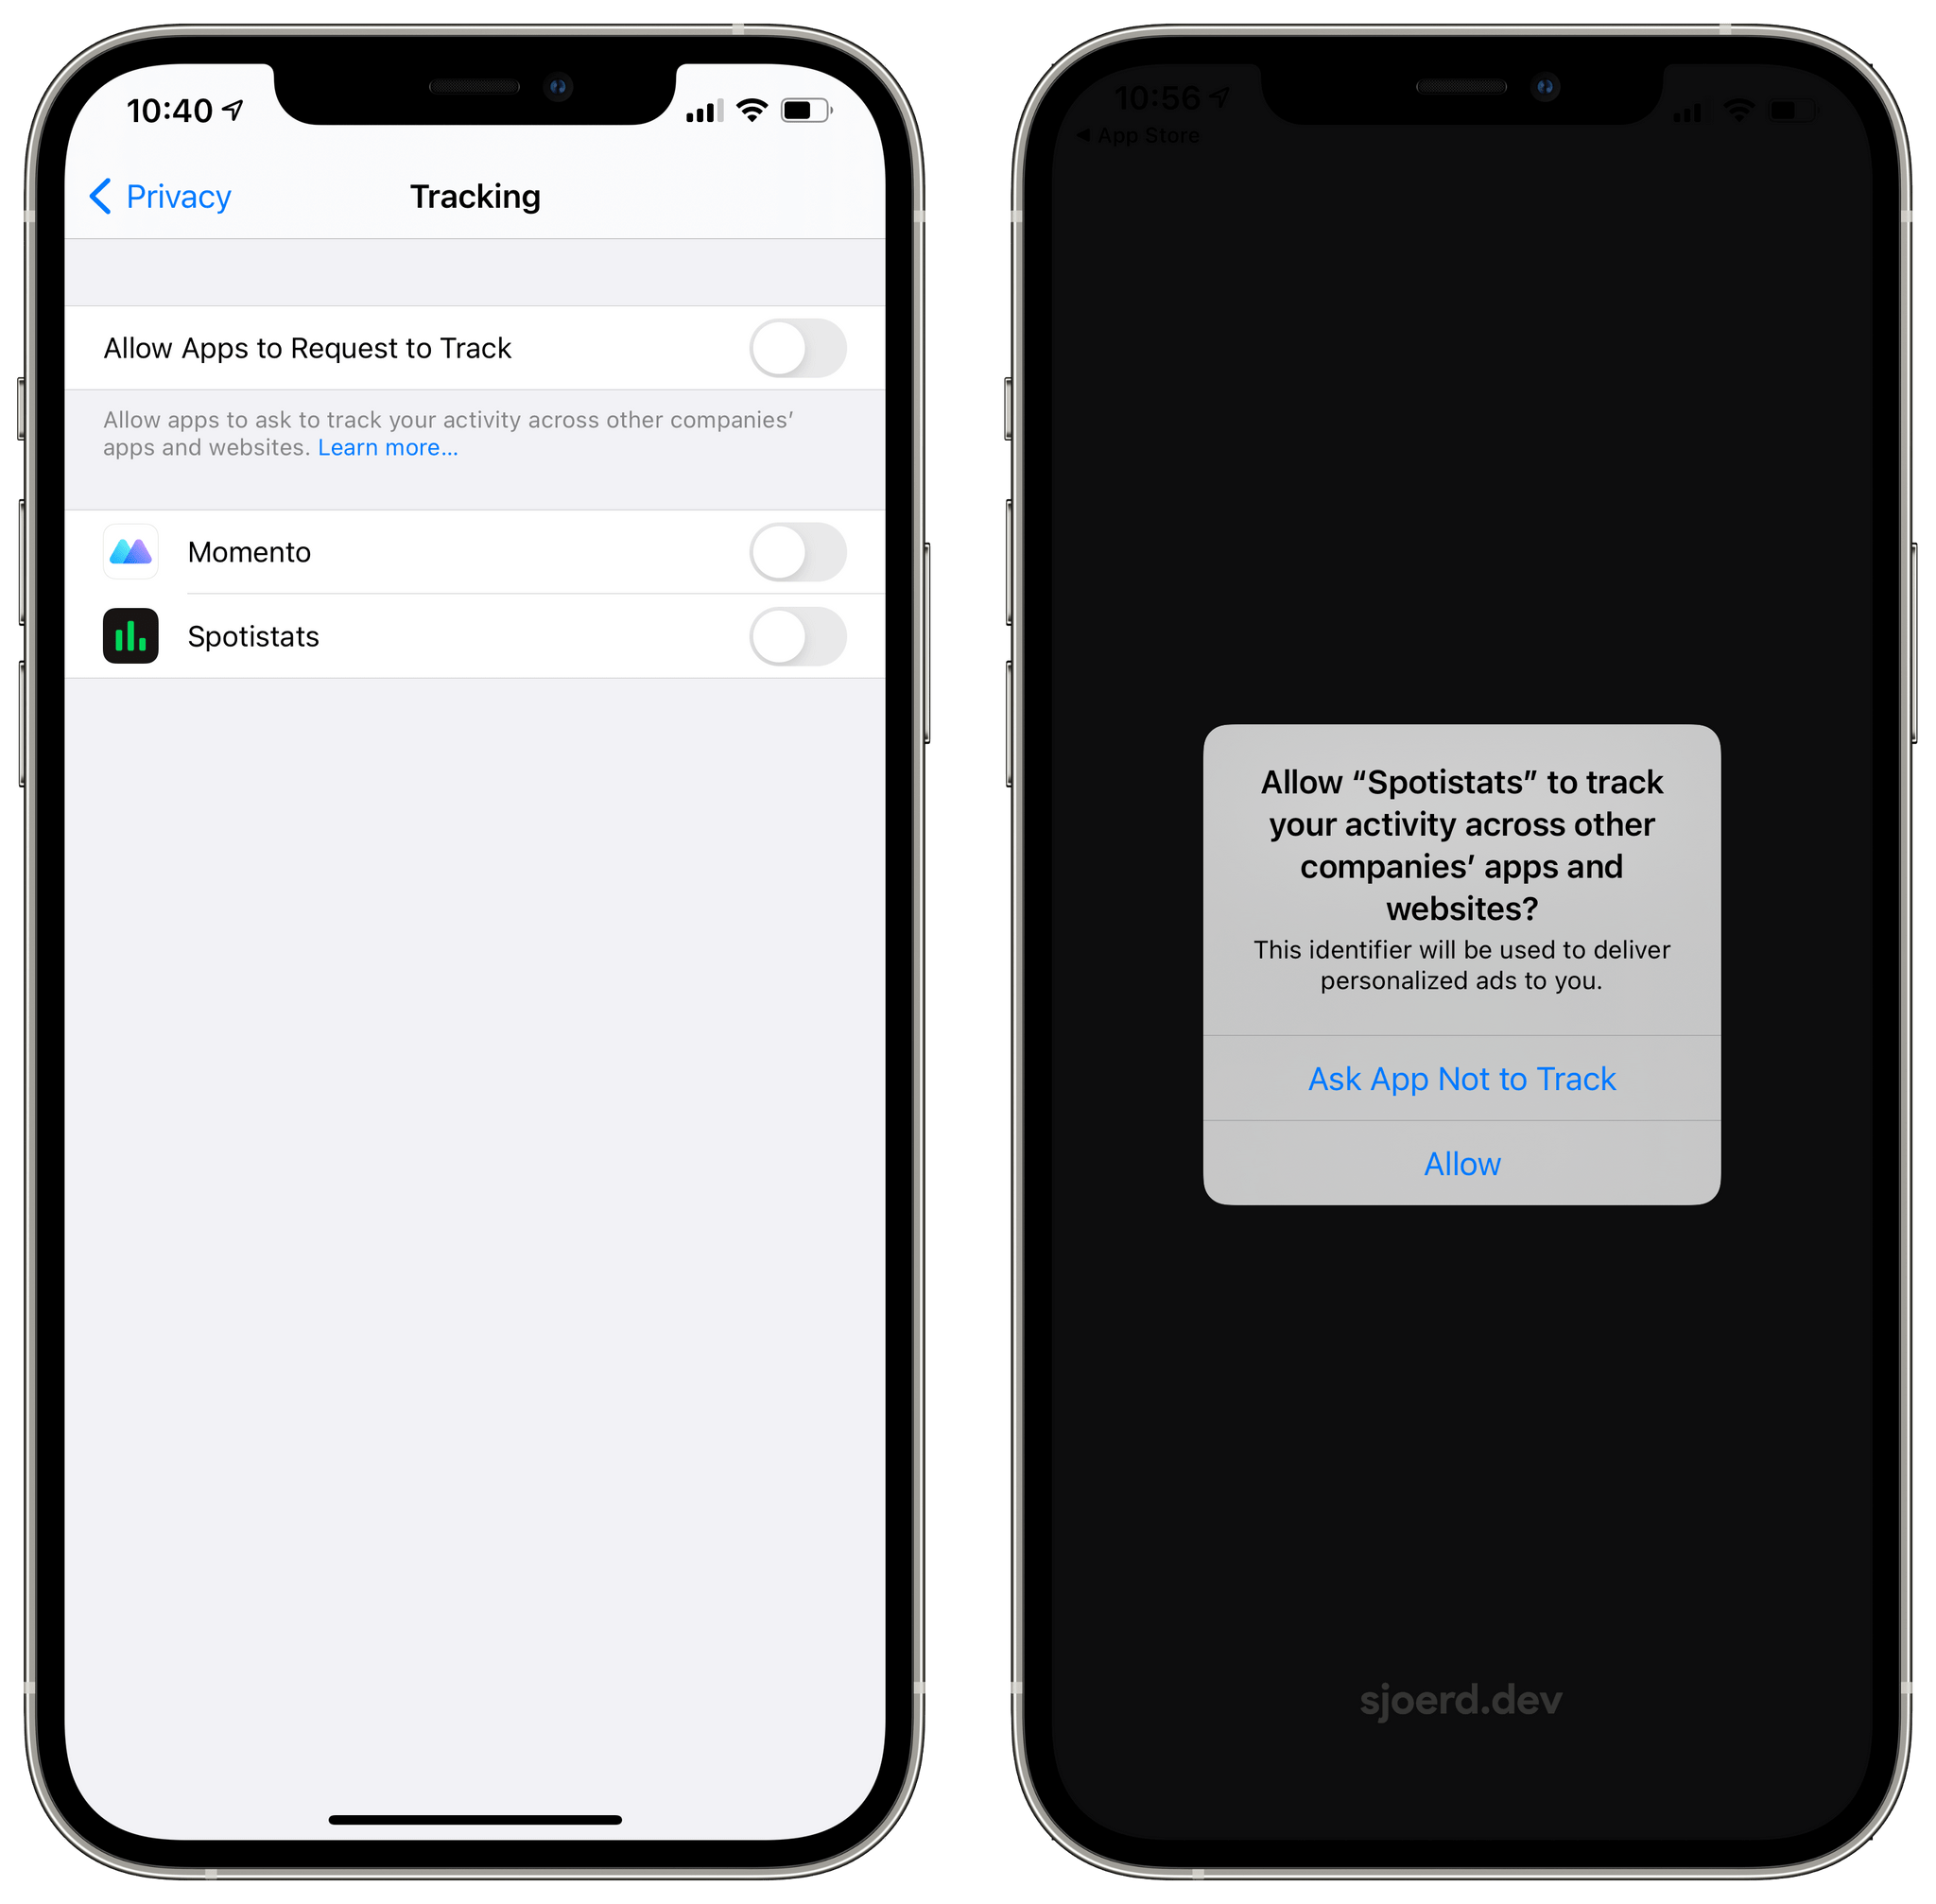 The new Tracking settings and prompt in iOS 14.5.